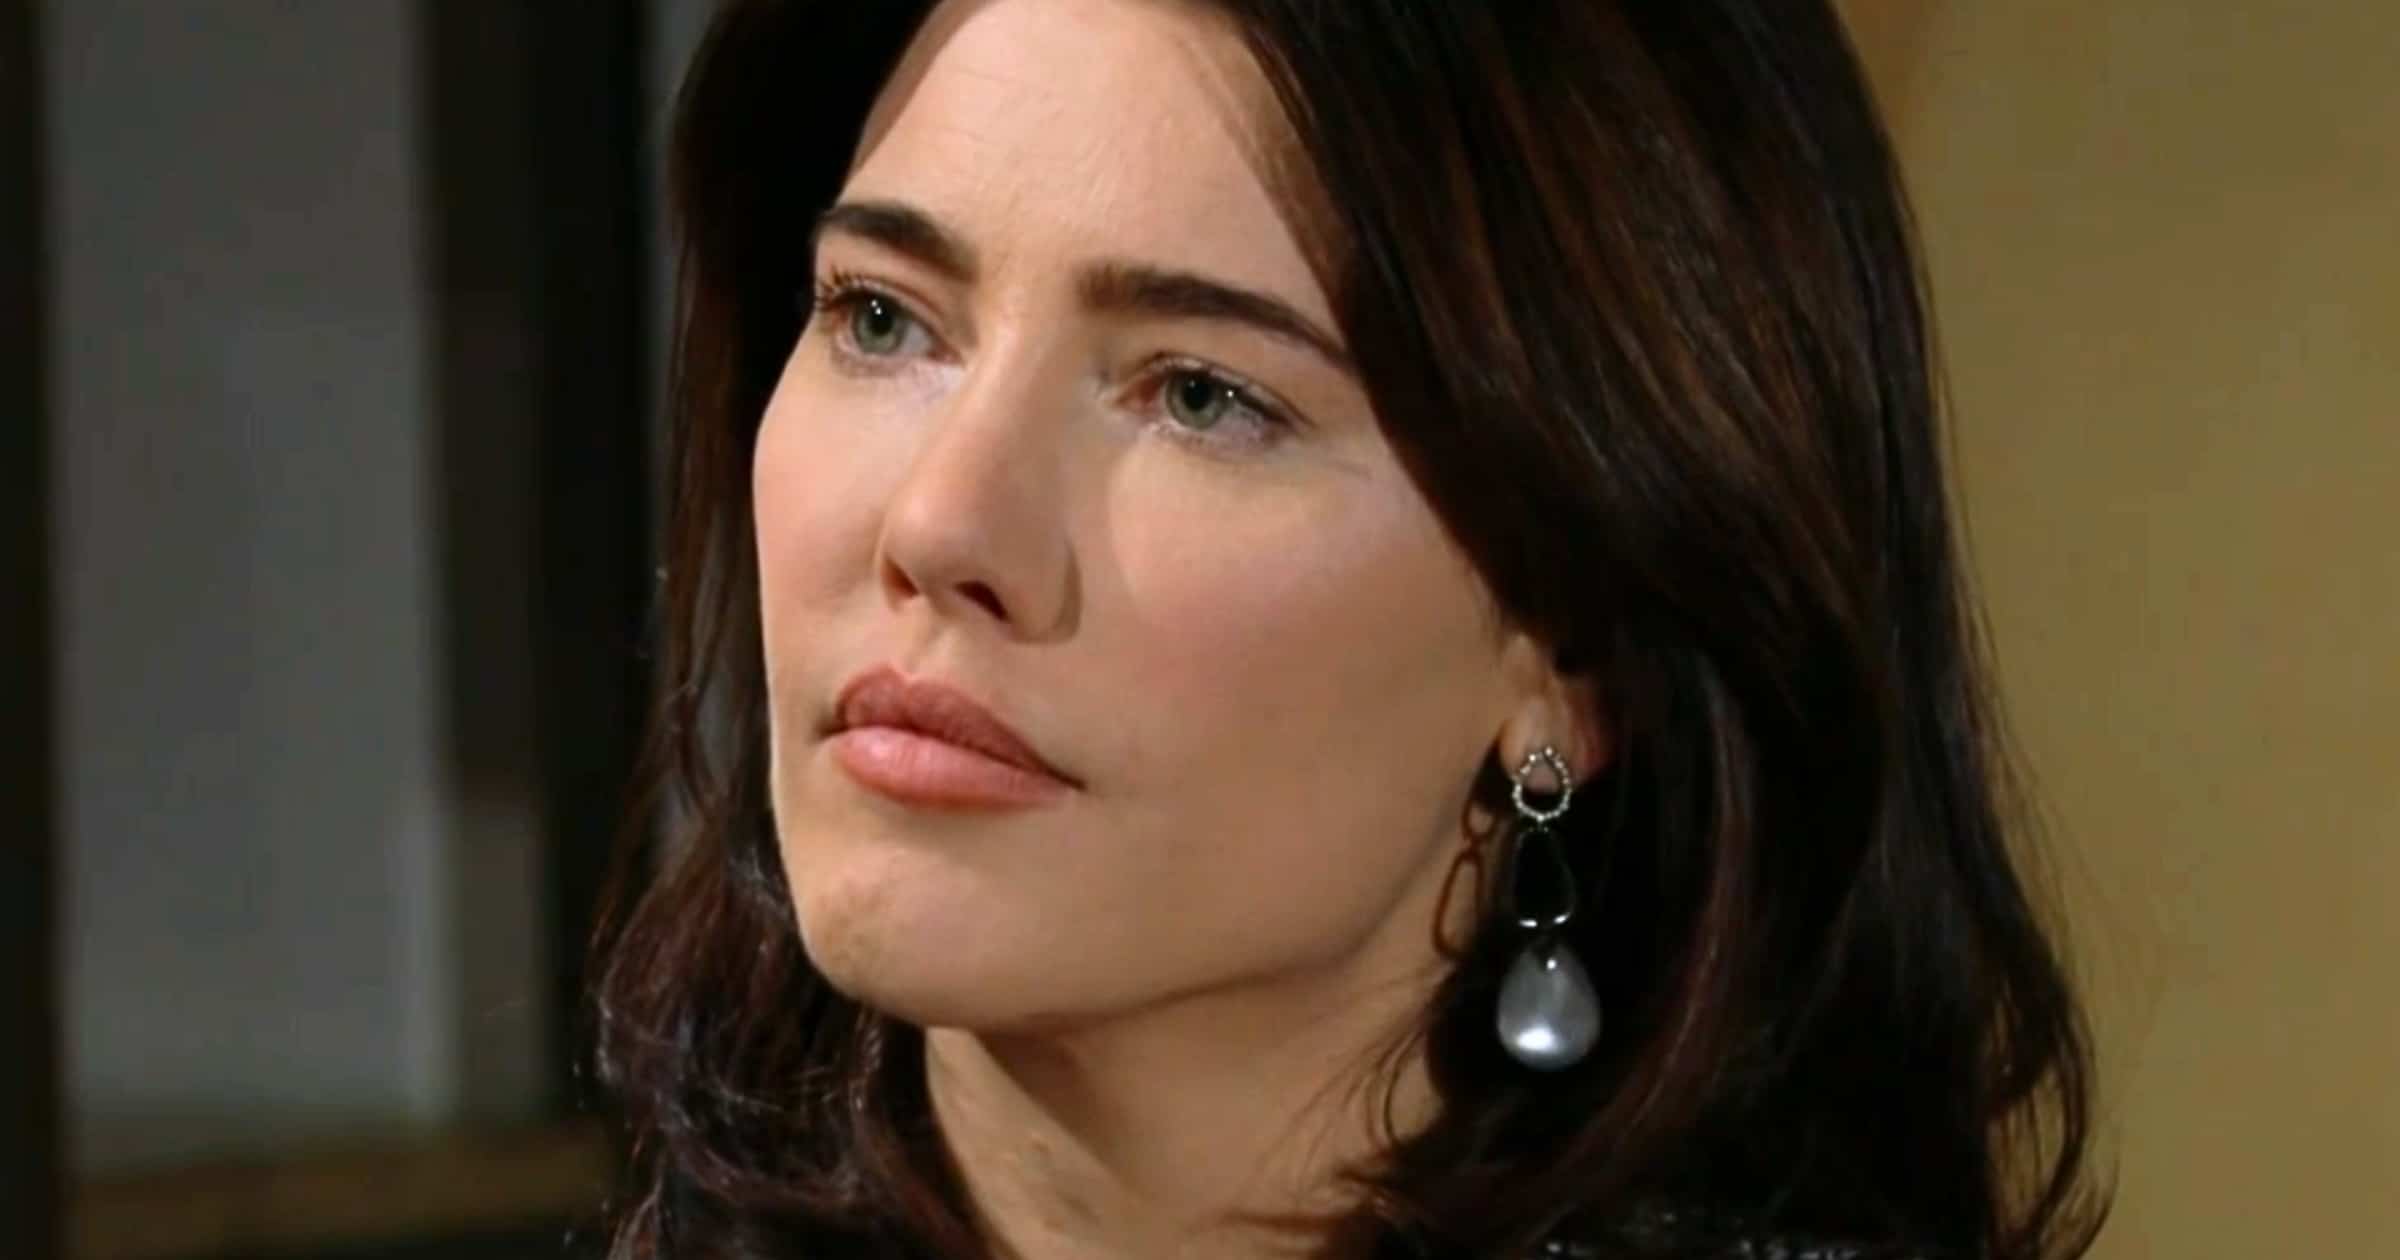 The Bold and the Beautiful - Jan 2-5 - Steffy